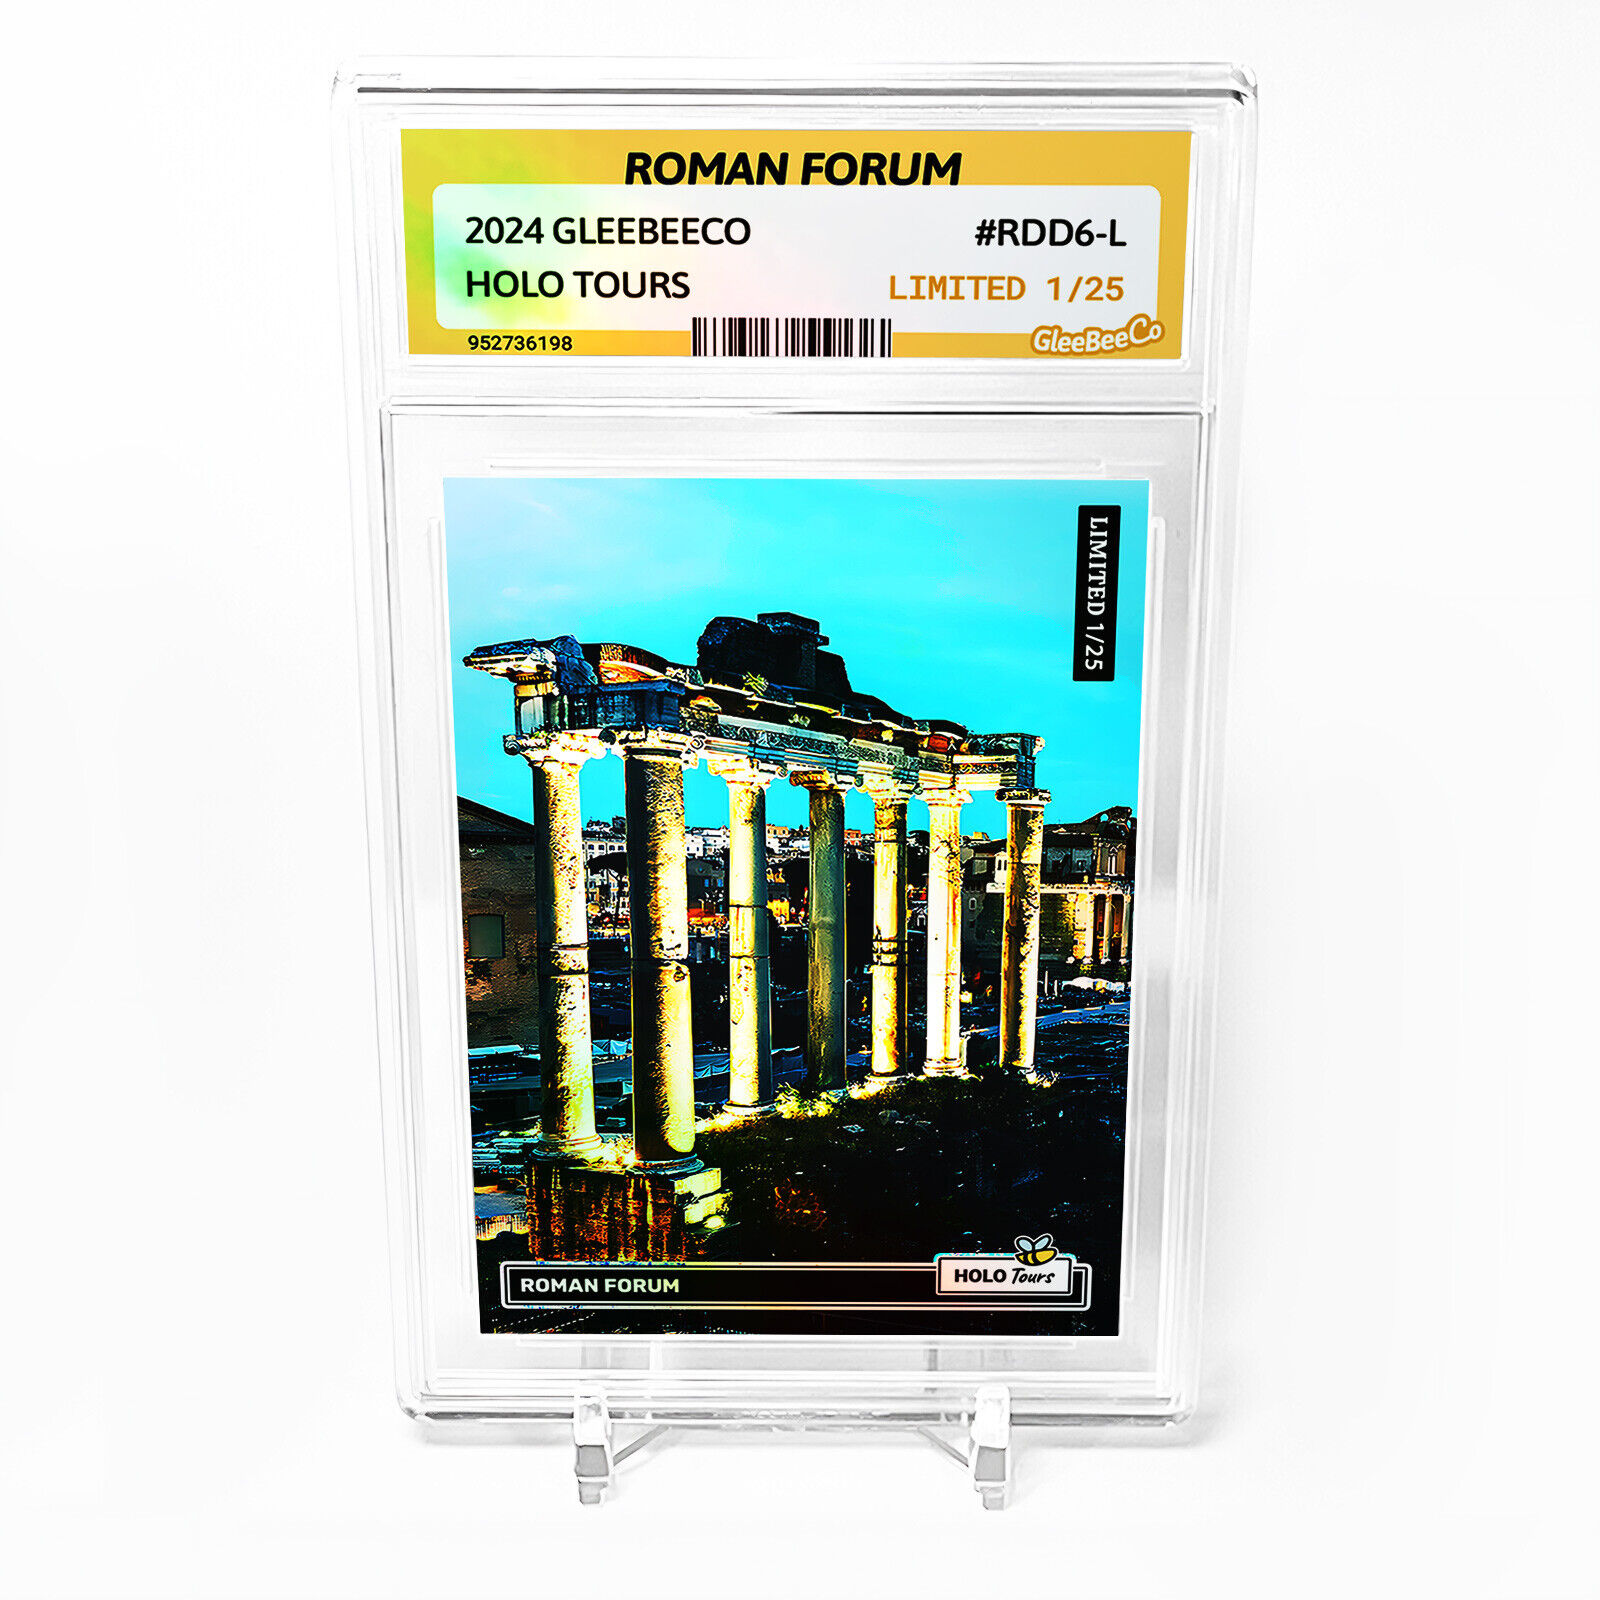 ROMAN FORUM Photo Card 2024 GleeBeeCo Holo Tours Slabbed #RDD6-L Only /25